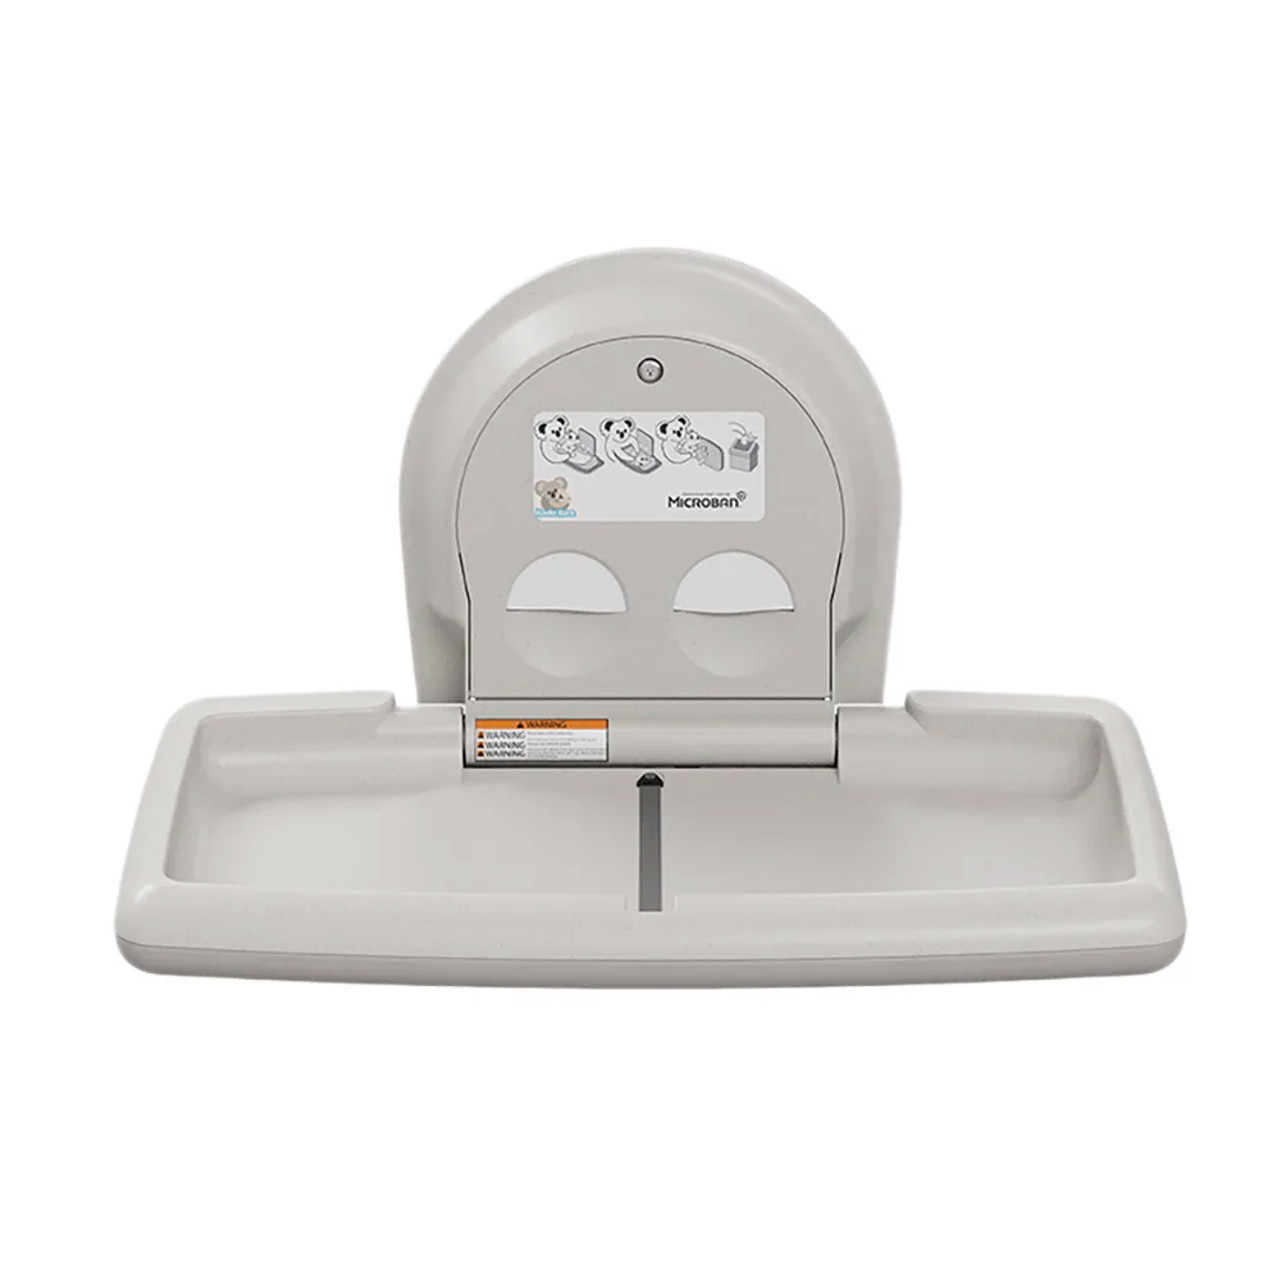 Koala Kare White Granite Horizontal Surface-Mounted Baby Changing Station - Convenient & Hygienic- CHICKEN PIECES